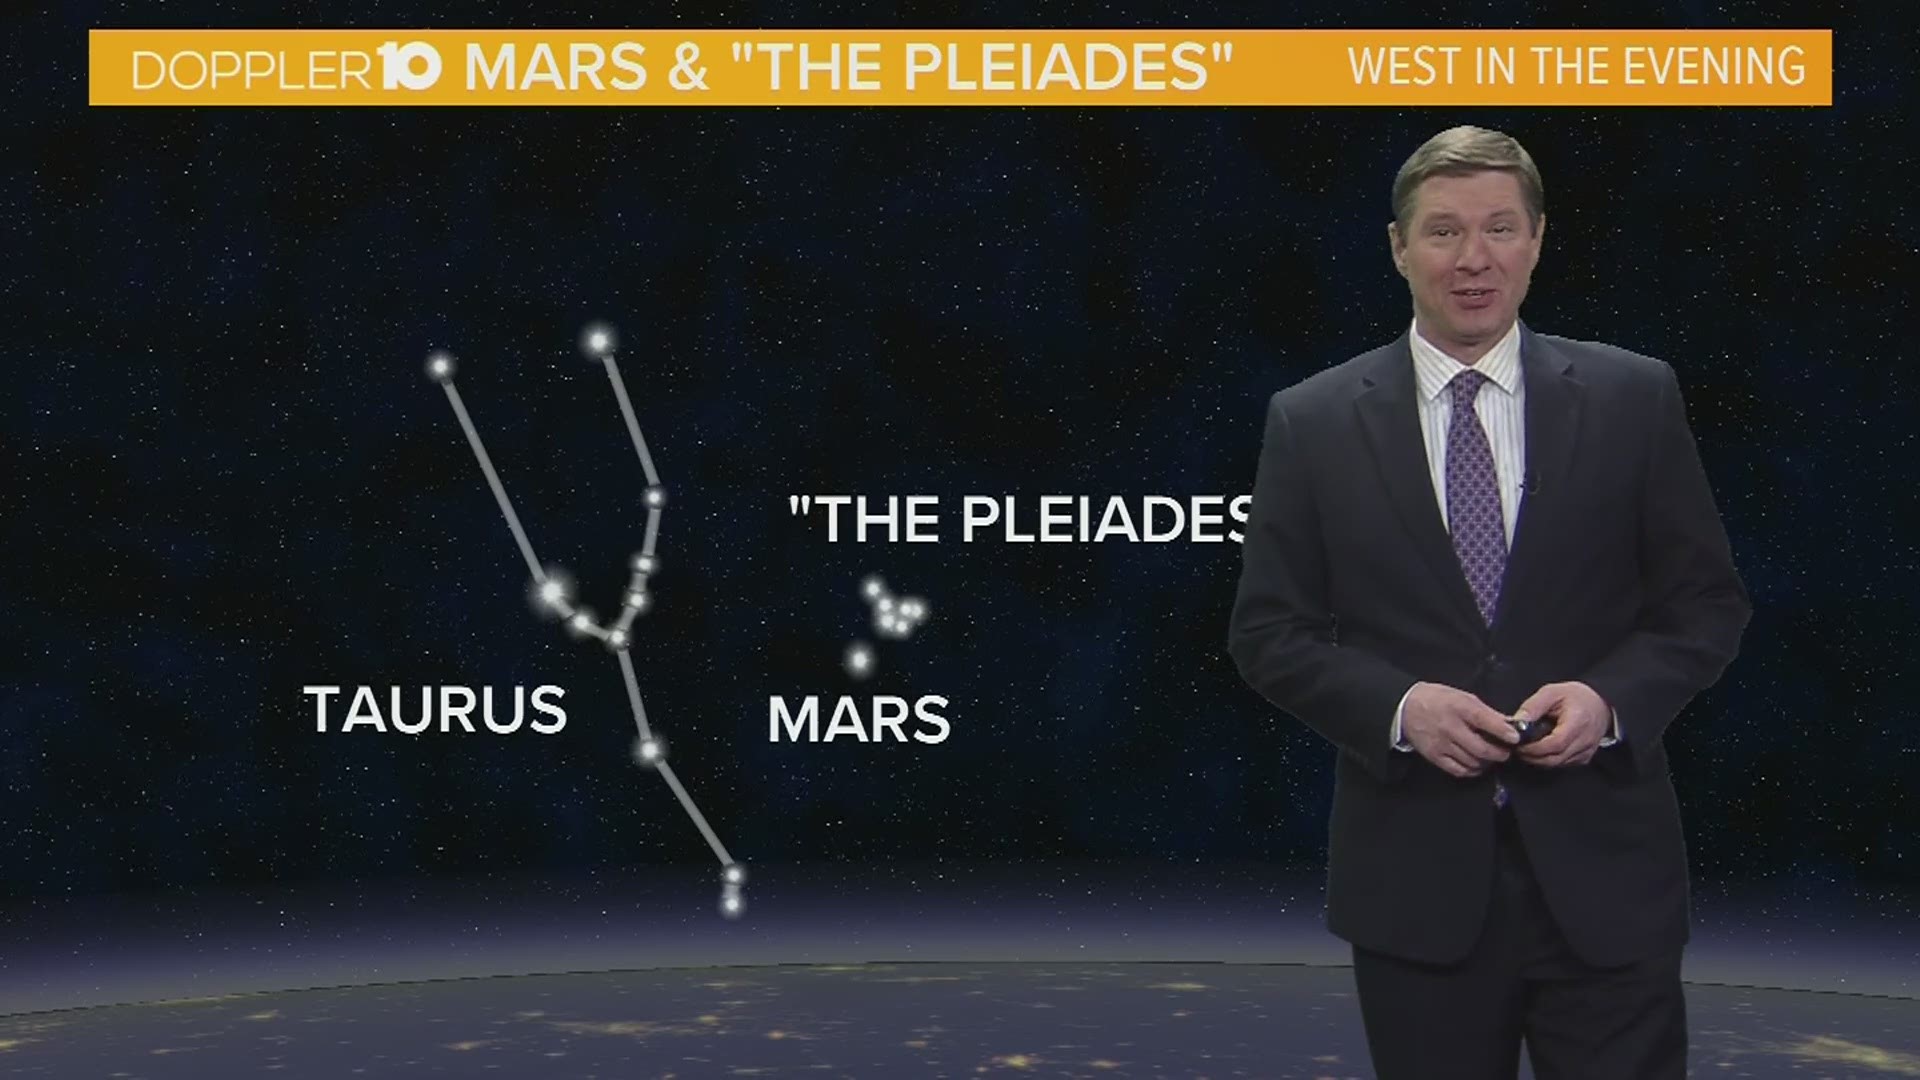 On Wednesday night, the Red Planet will pass close by the "Seven Sisters" or "The Pleiades."